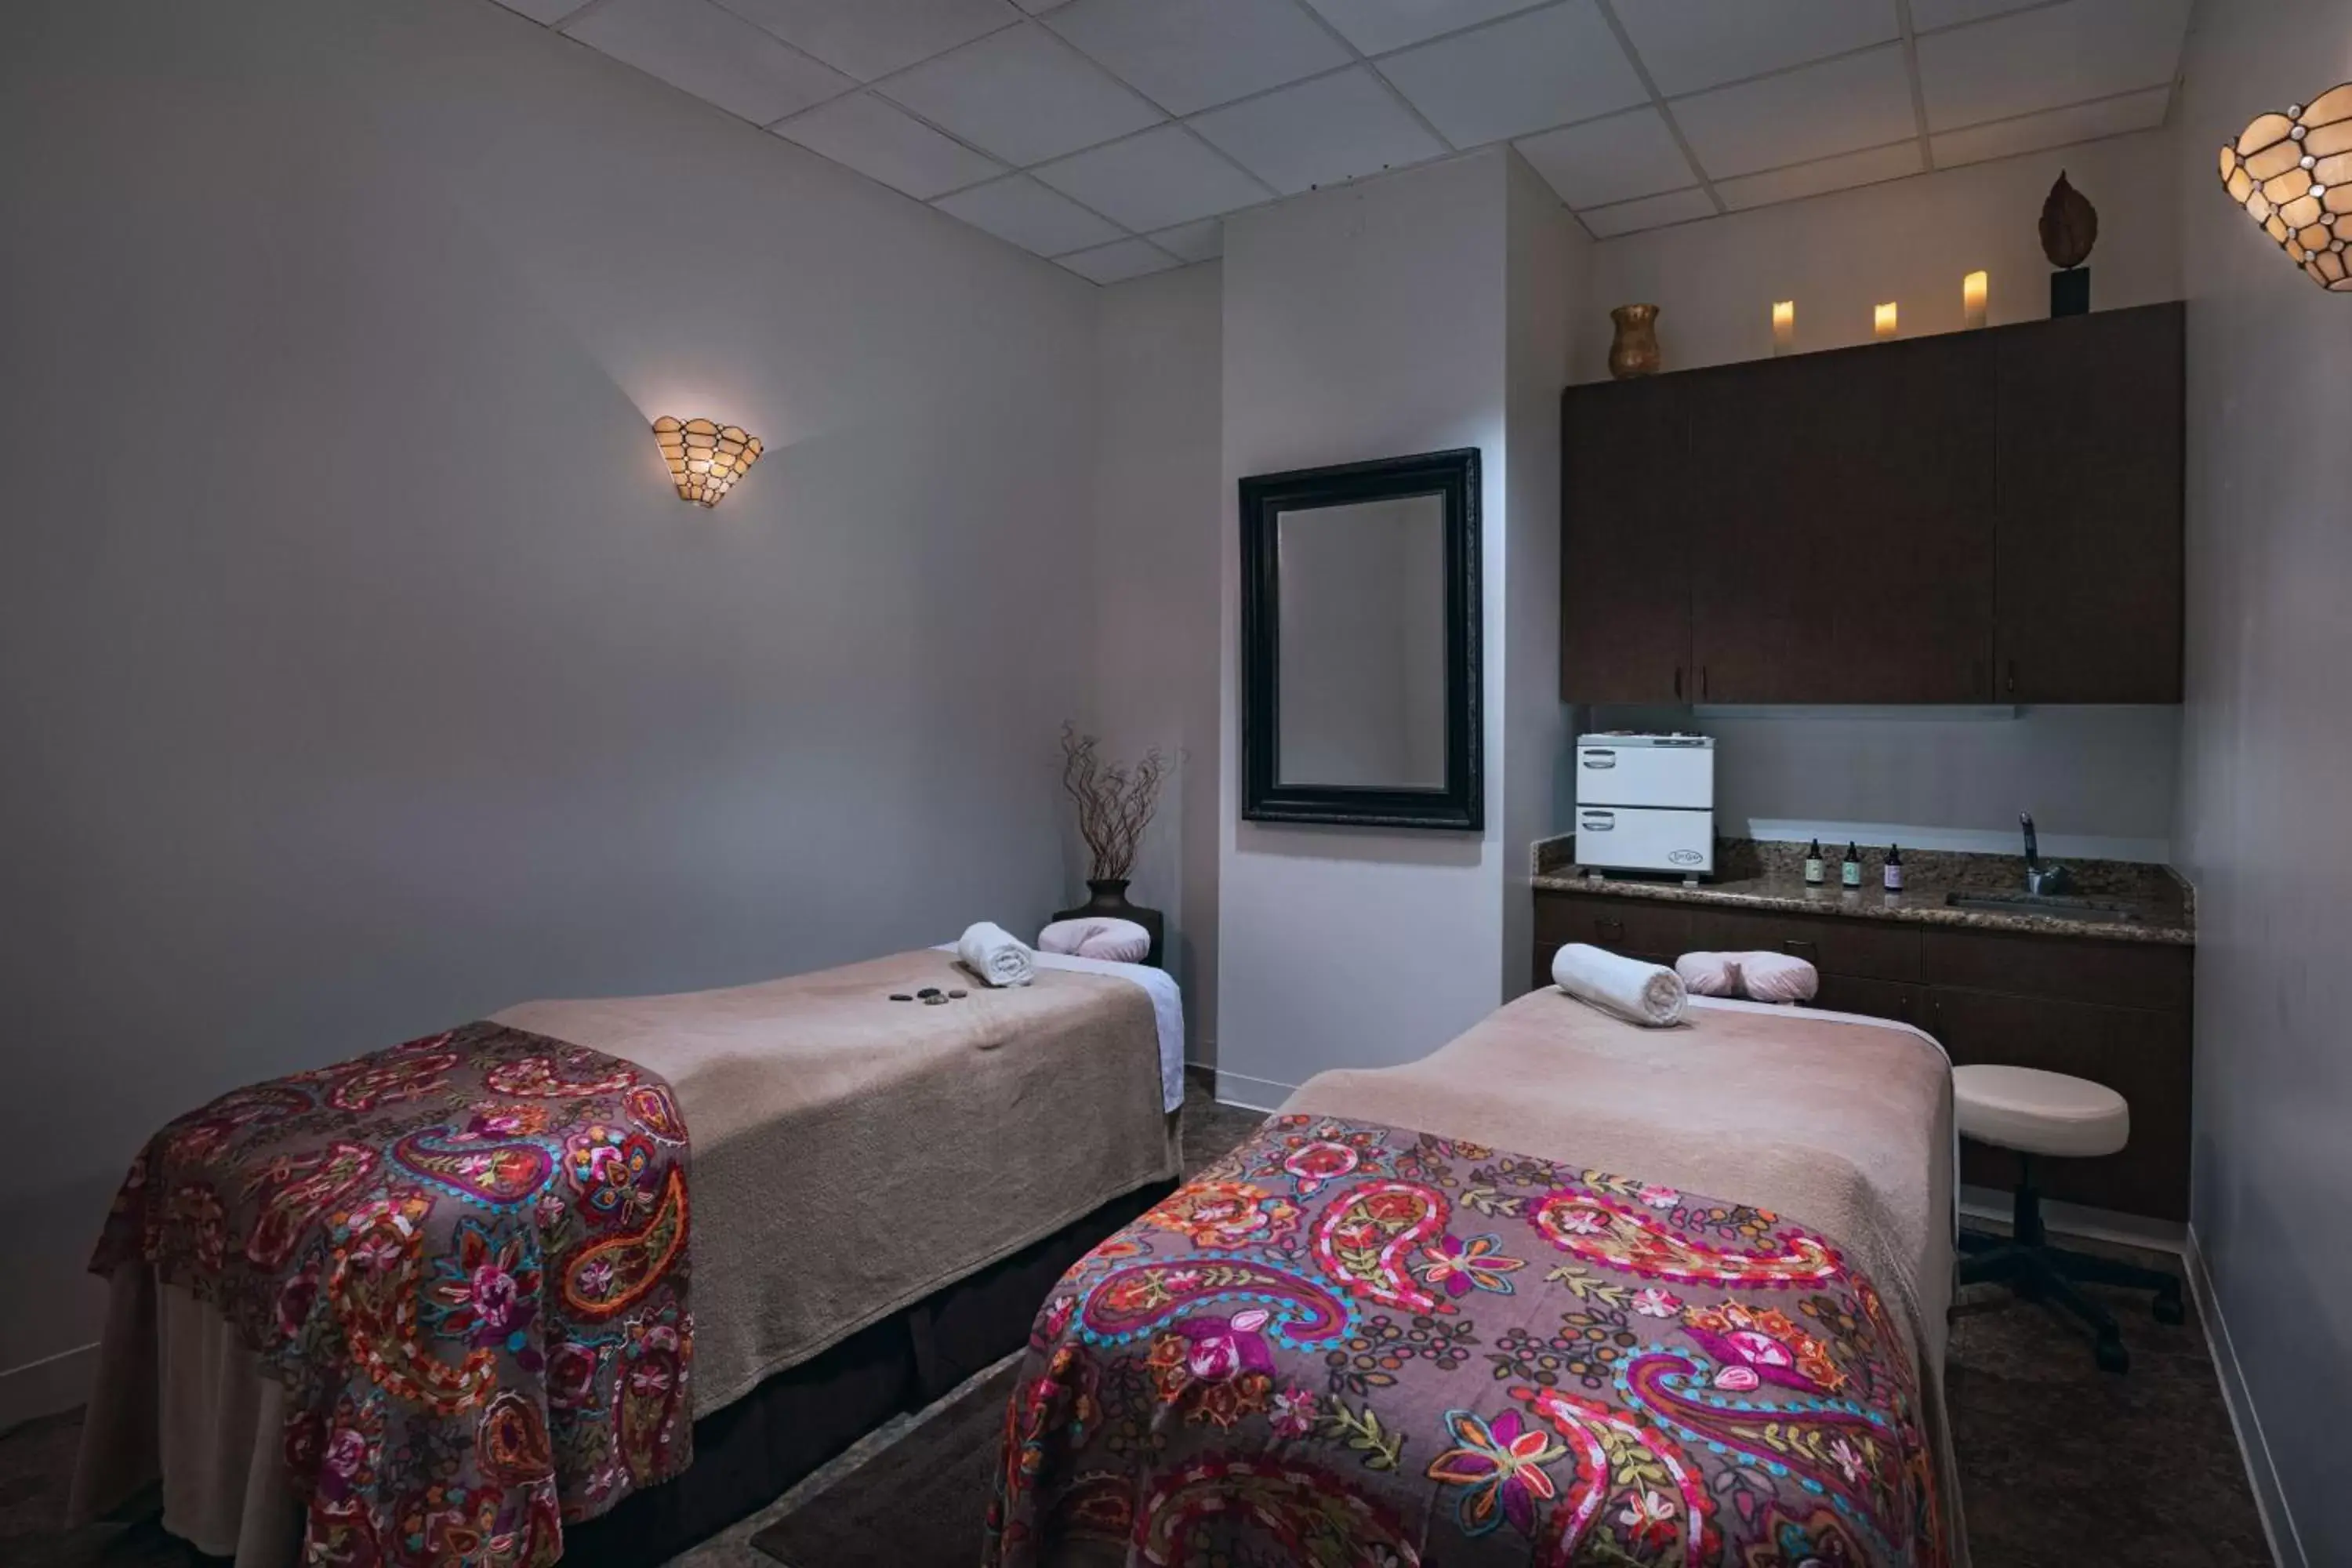 Spa and wellness centre/facilities in The Woodlands Waterway Marriott Hotel and Convention Center